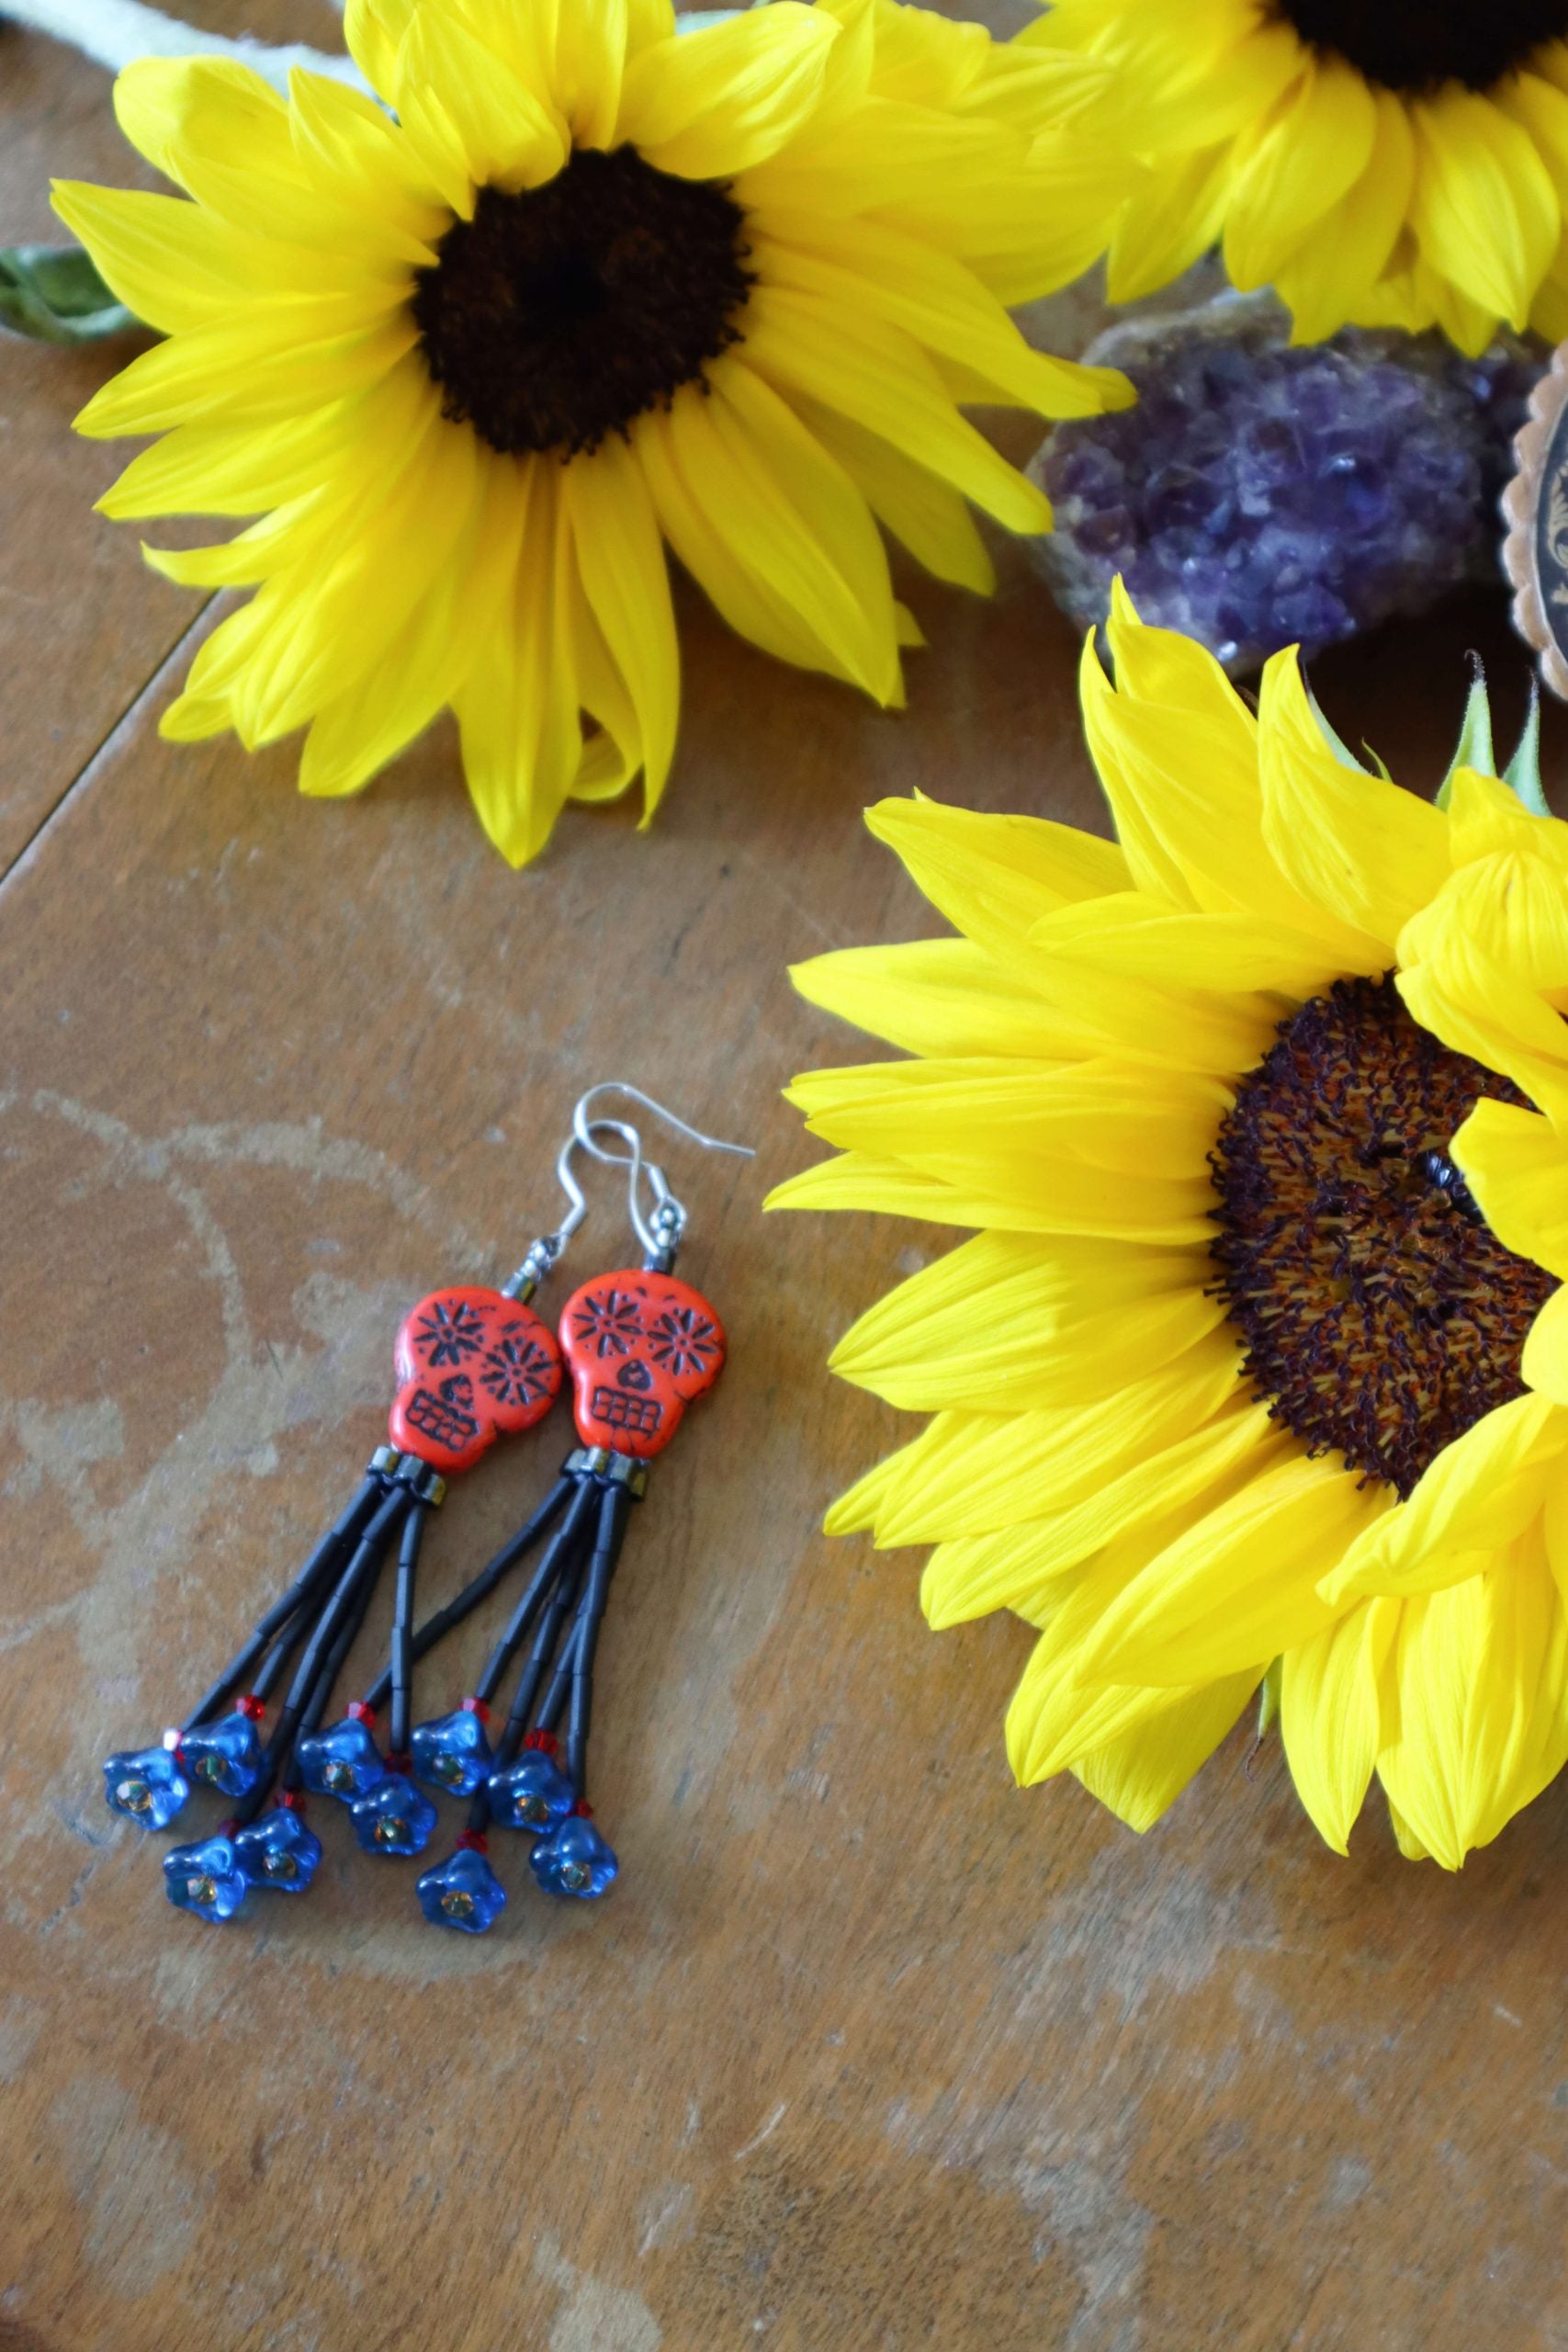 red-sugar-skull-tassel-earrings-for-day-of-the-dead-dia-de-muertos-by-kaleidoscopes-and-polka-dots